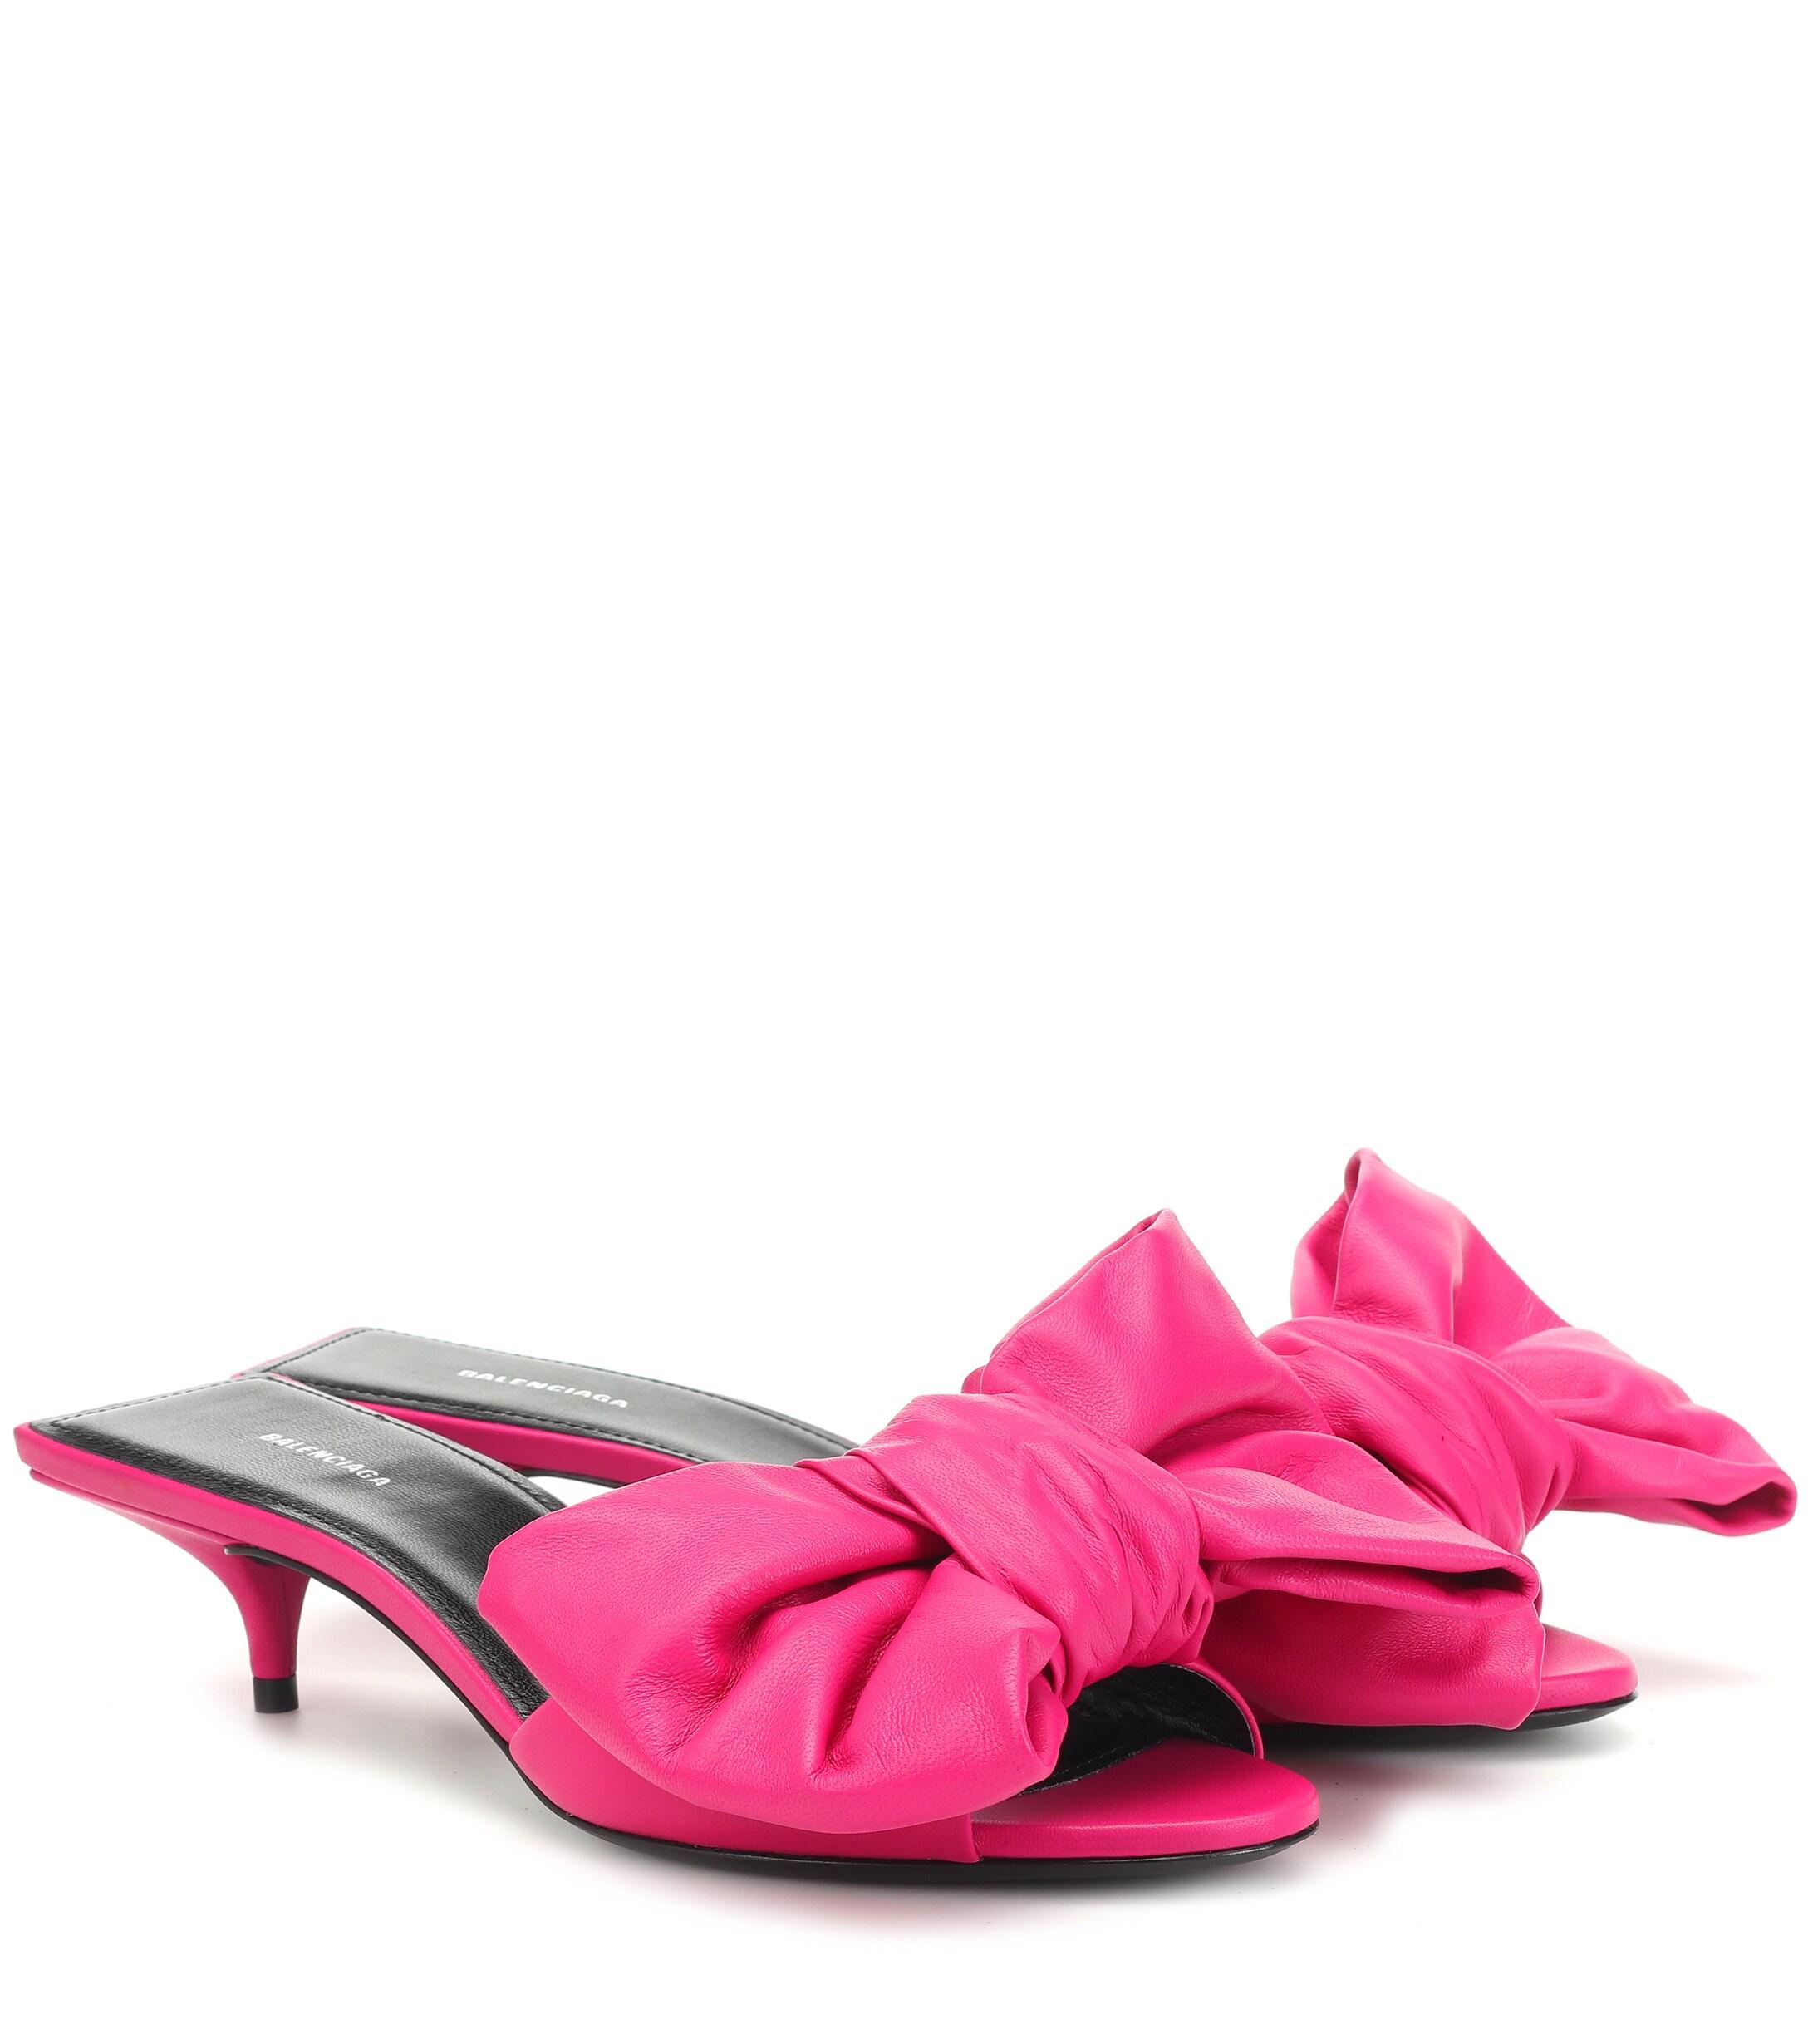 Balenciaga Leather Sandals in Pink - Lyst